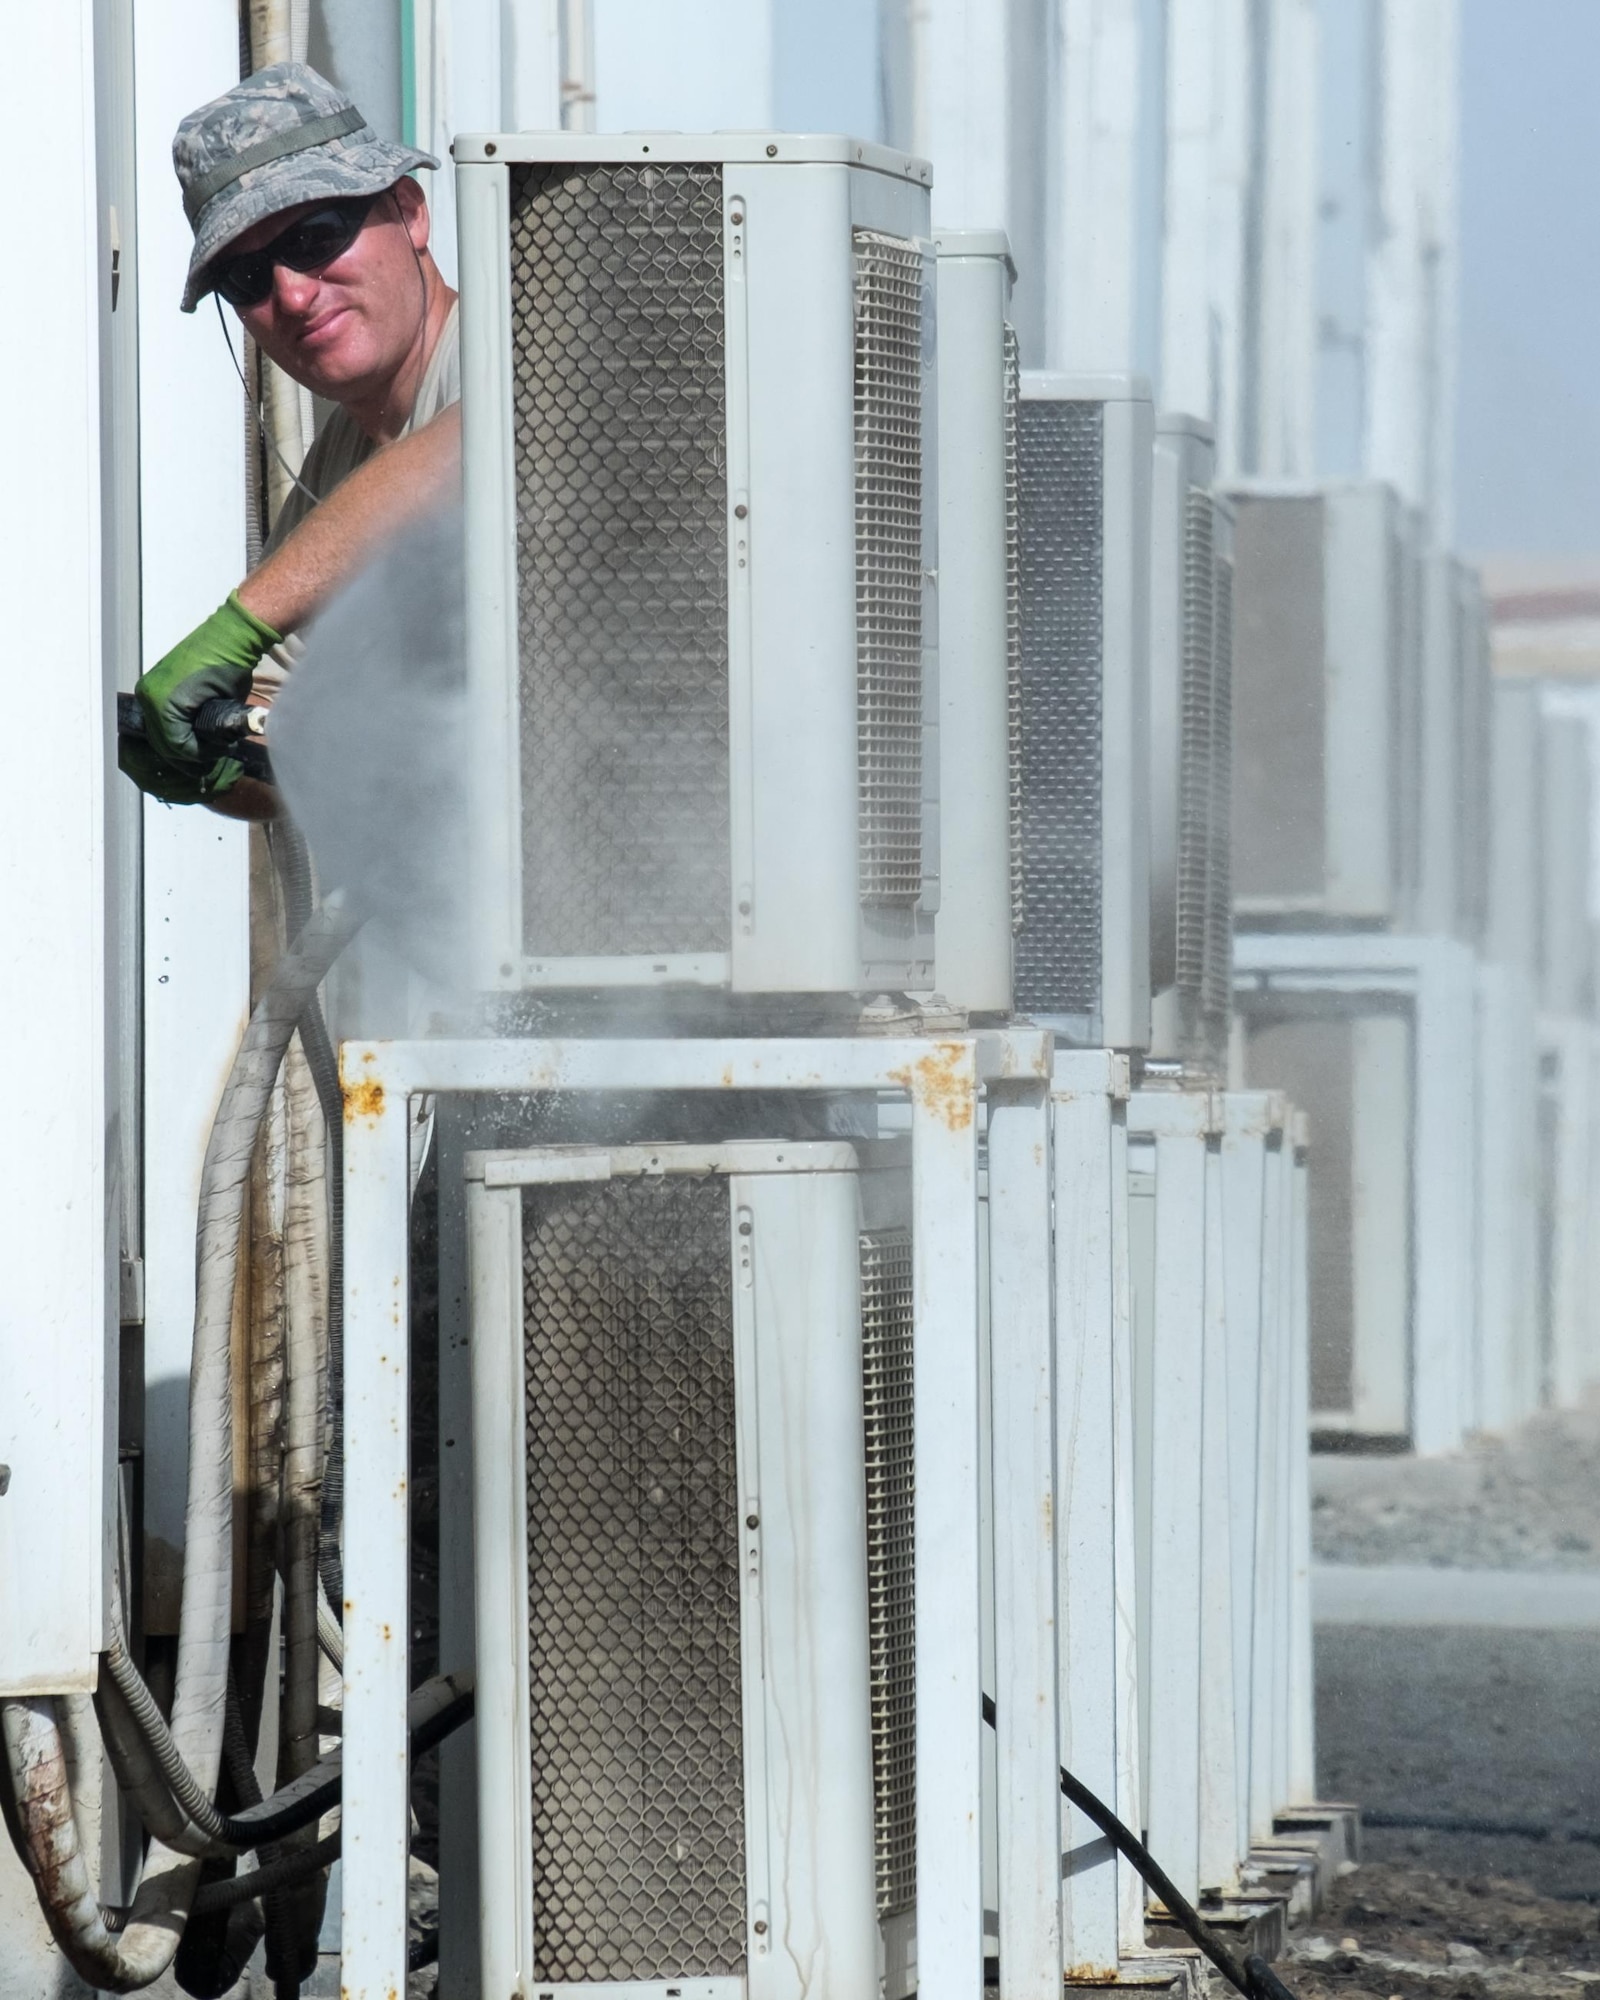 Senior Airman Thomas, 380th Expeditionary Civil Engineer Squadron heating, ventilation, and air conditioning technician, washes air conditioner condenser coils August 8, 2017, at Al Dhafra Air Base, United Arab Emirates.